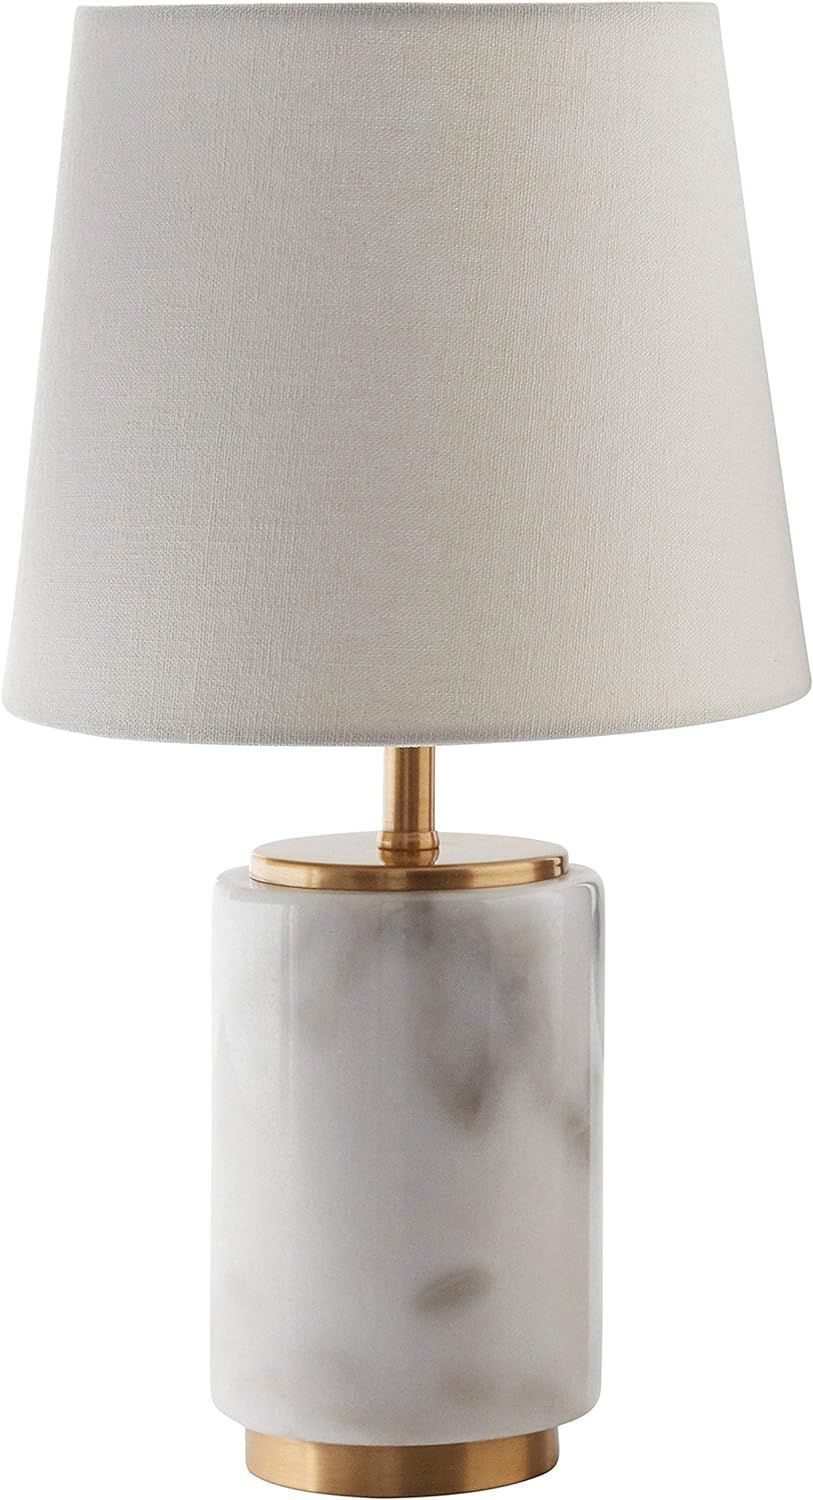 Amazon Brand - Rivet Mid Century Modern Marble and Brass Table Decor Lamp With LED Light Bulb, 14... | Amazon (US)